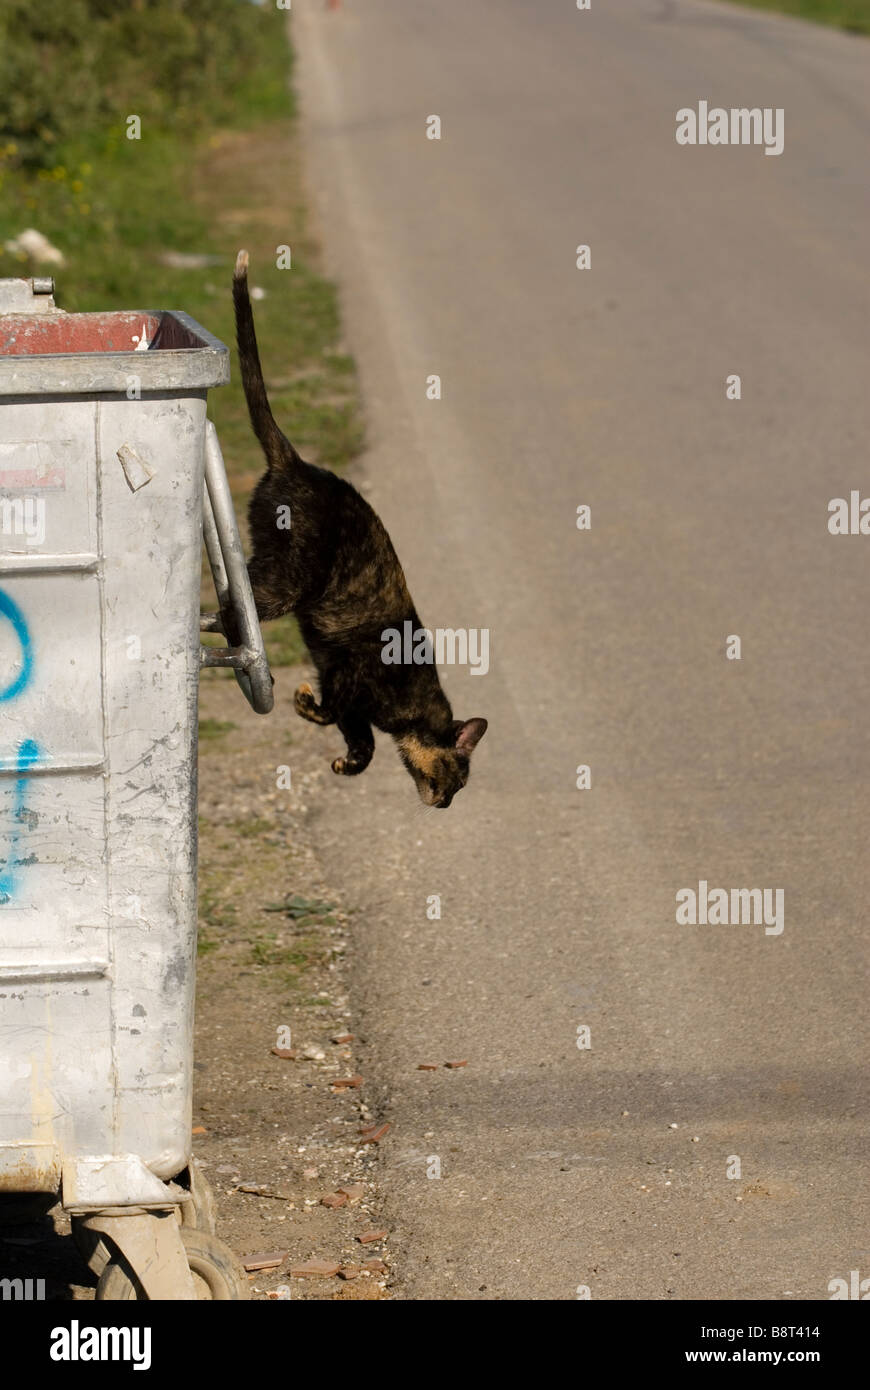 Domestic cat jumping out of metal garbage container by side of road Stock Photo